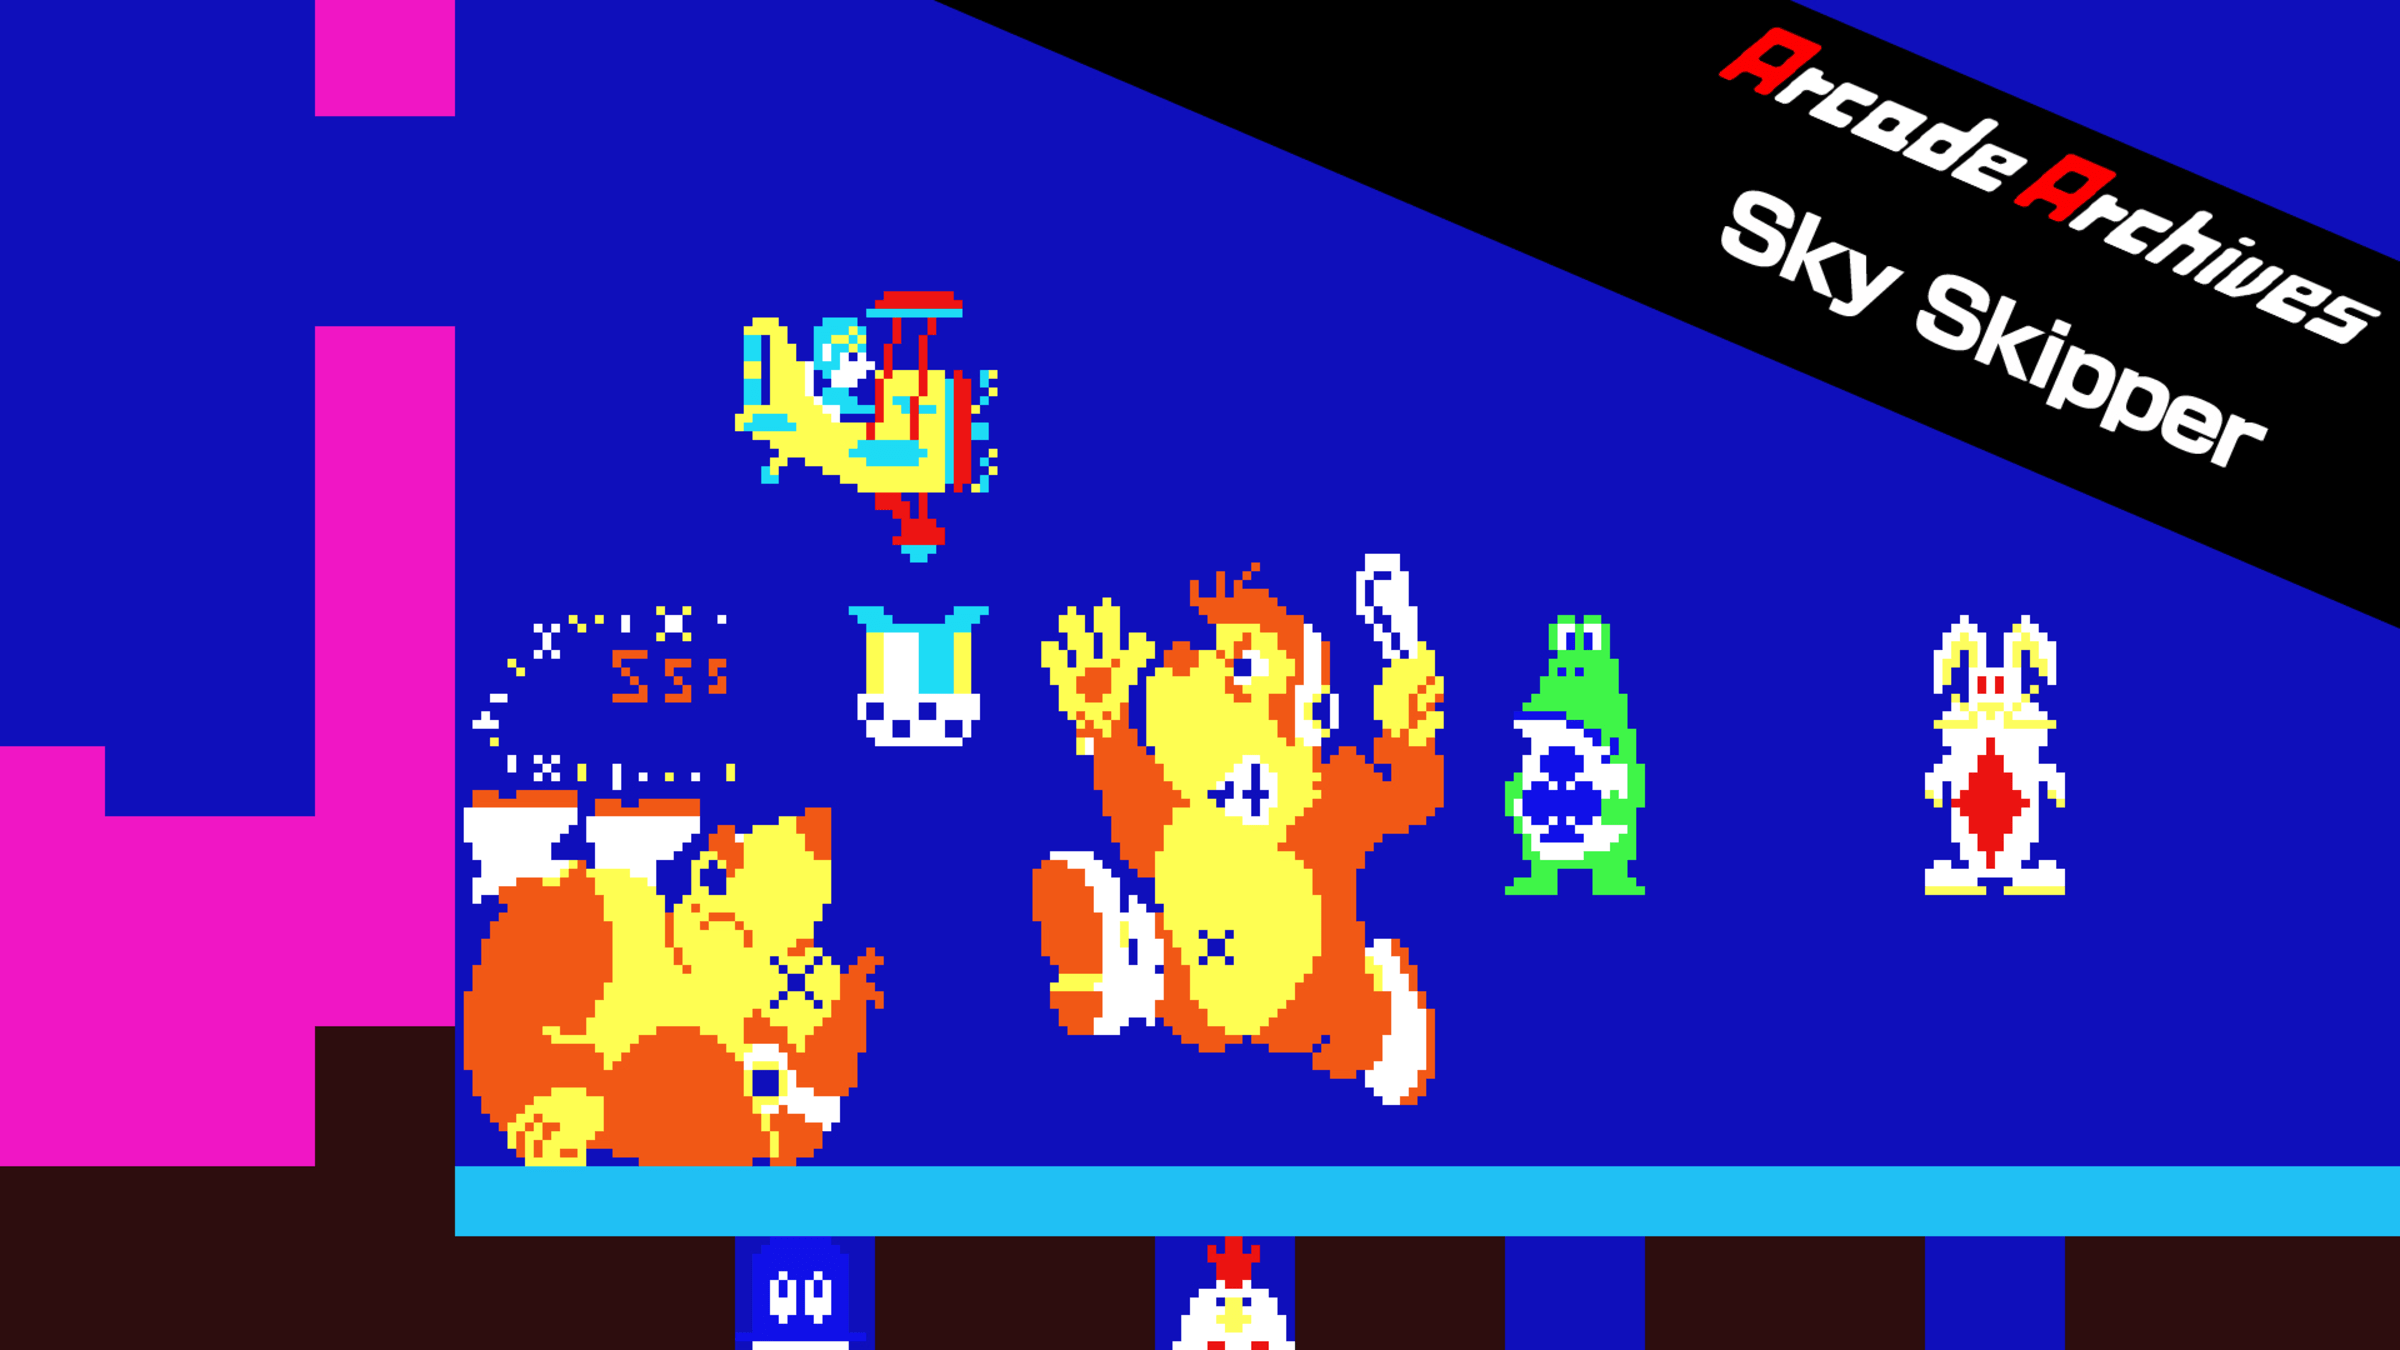 Donkey Kong, Sky Skipper come to Nintendo Switch Arcade Archives